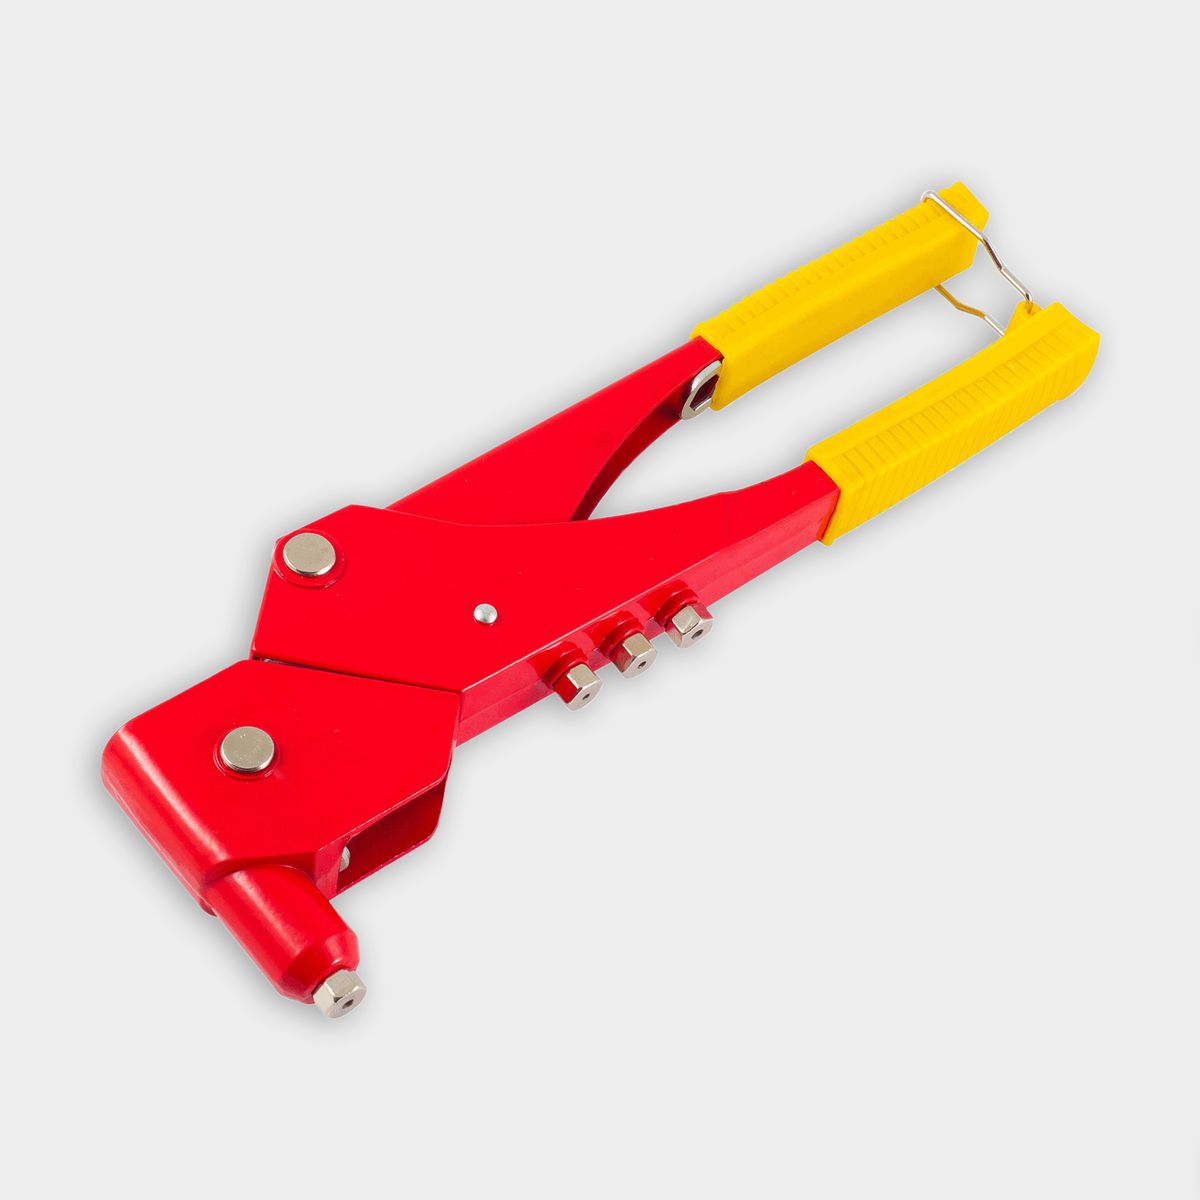 Red pop rivet gun with a yellow handle